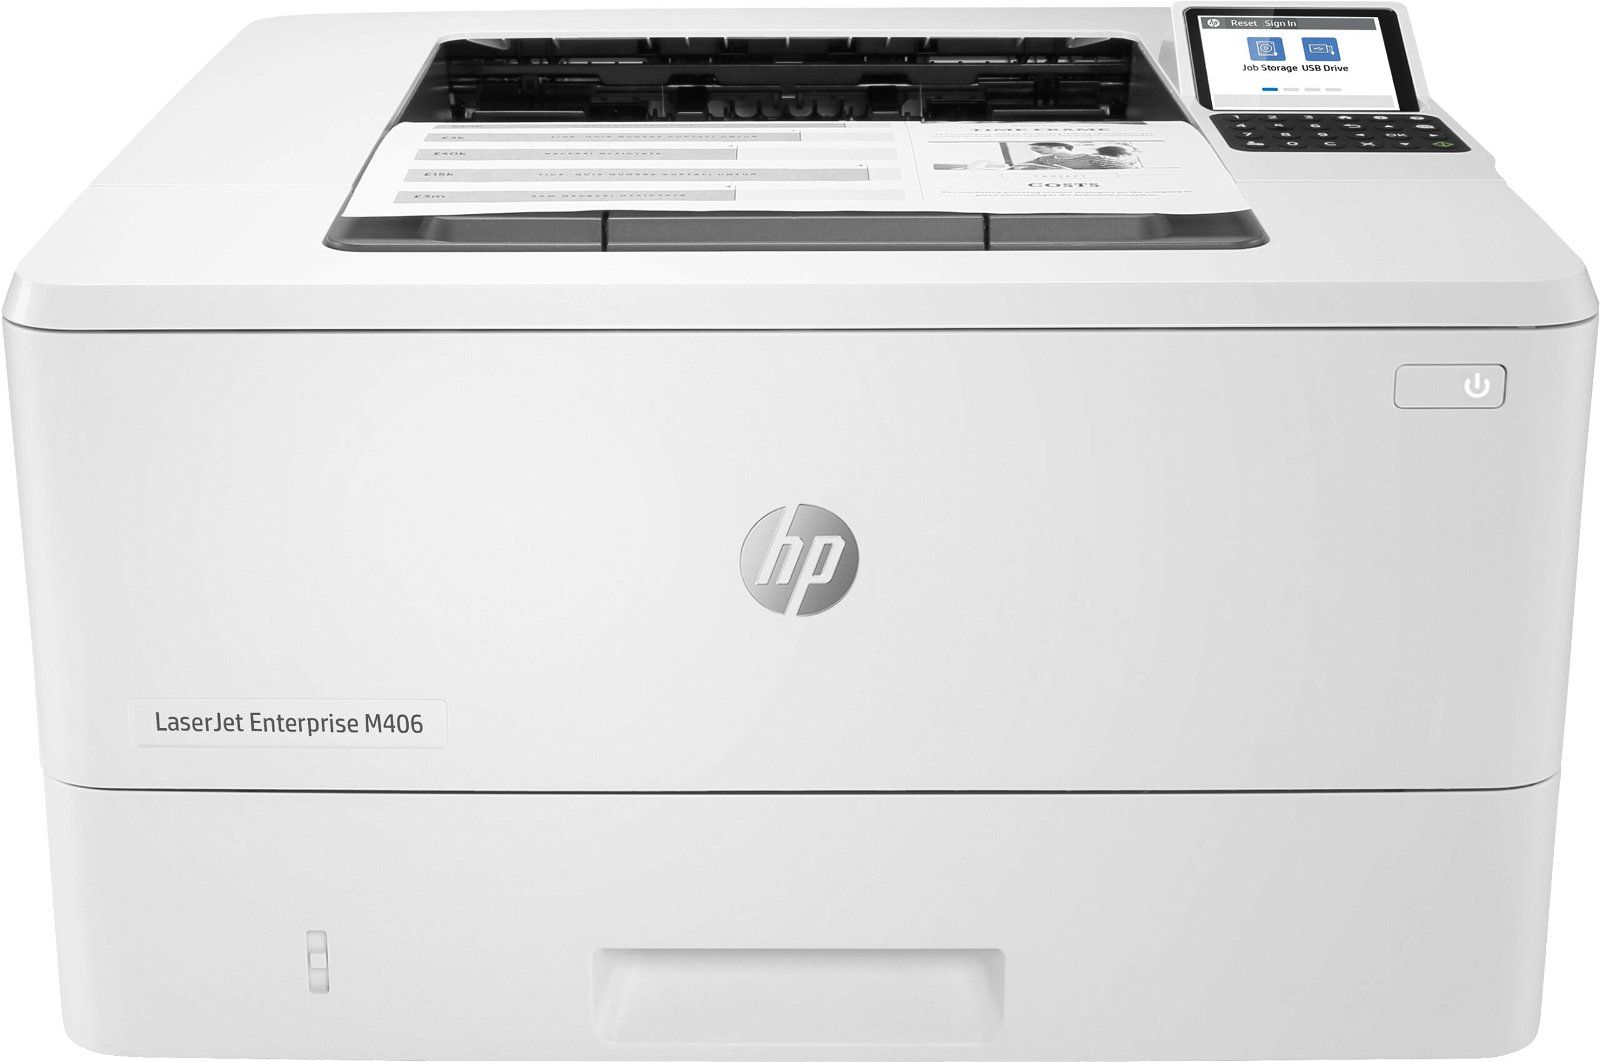 LaserJet Enterprise M406dn - Print - Compact Size; Strong Security; Two-sided printing; Energy Efficient; Front-facing USB printing - Laser - 1200 x 1200 DPI -_1